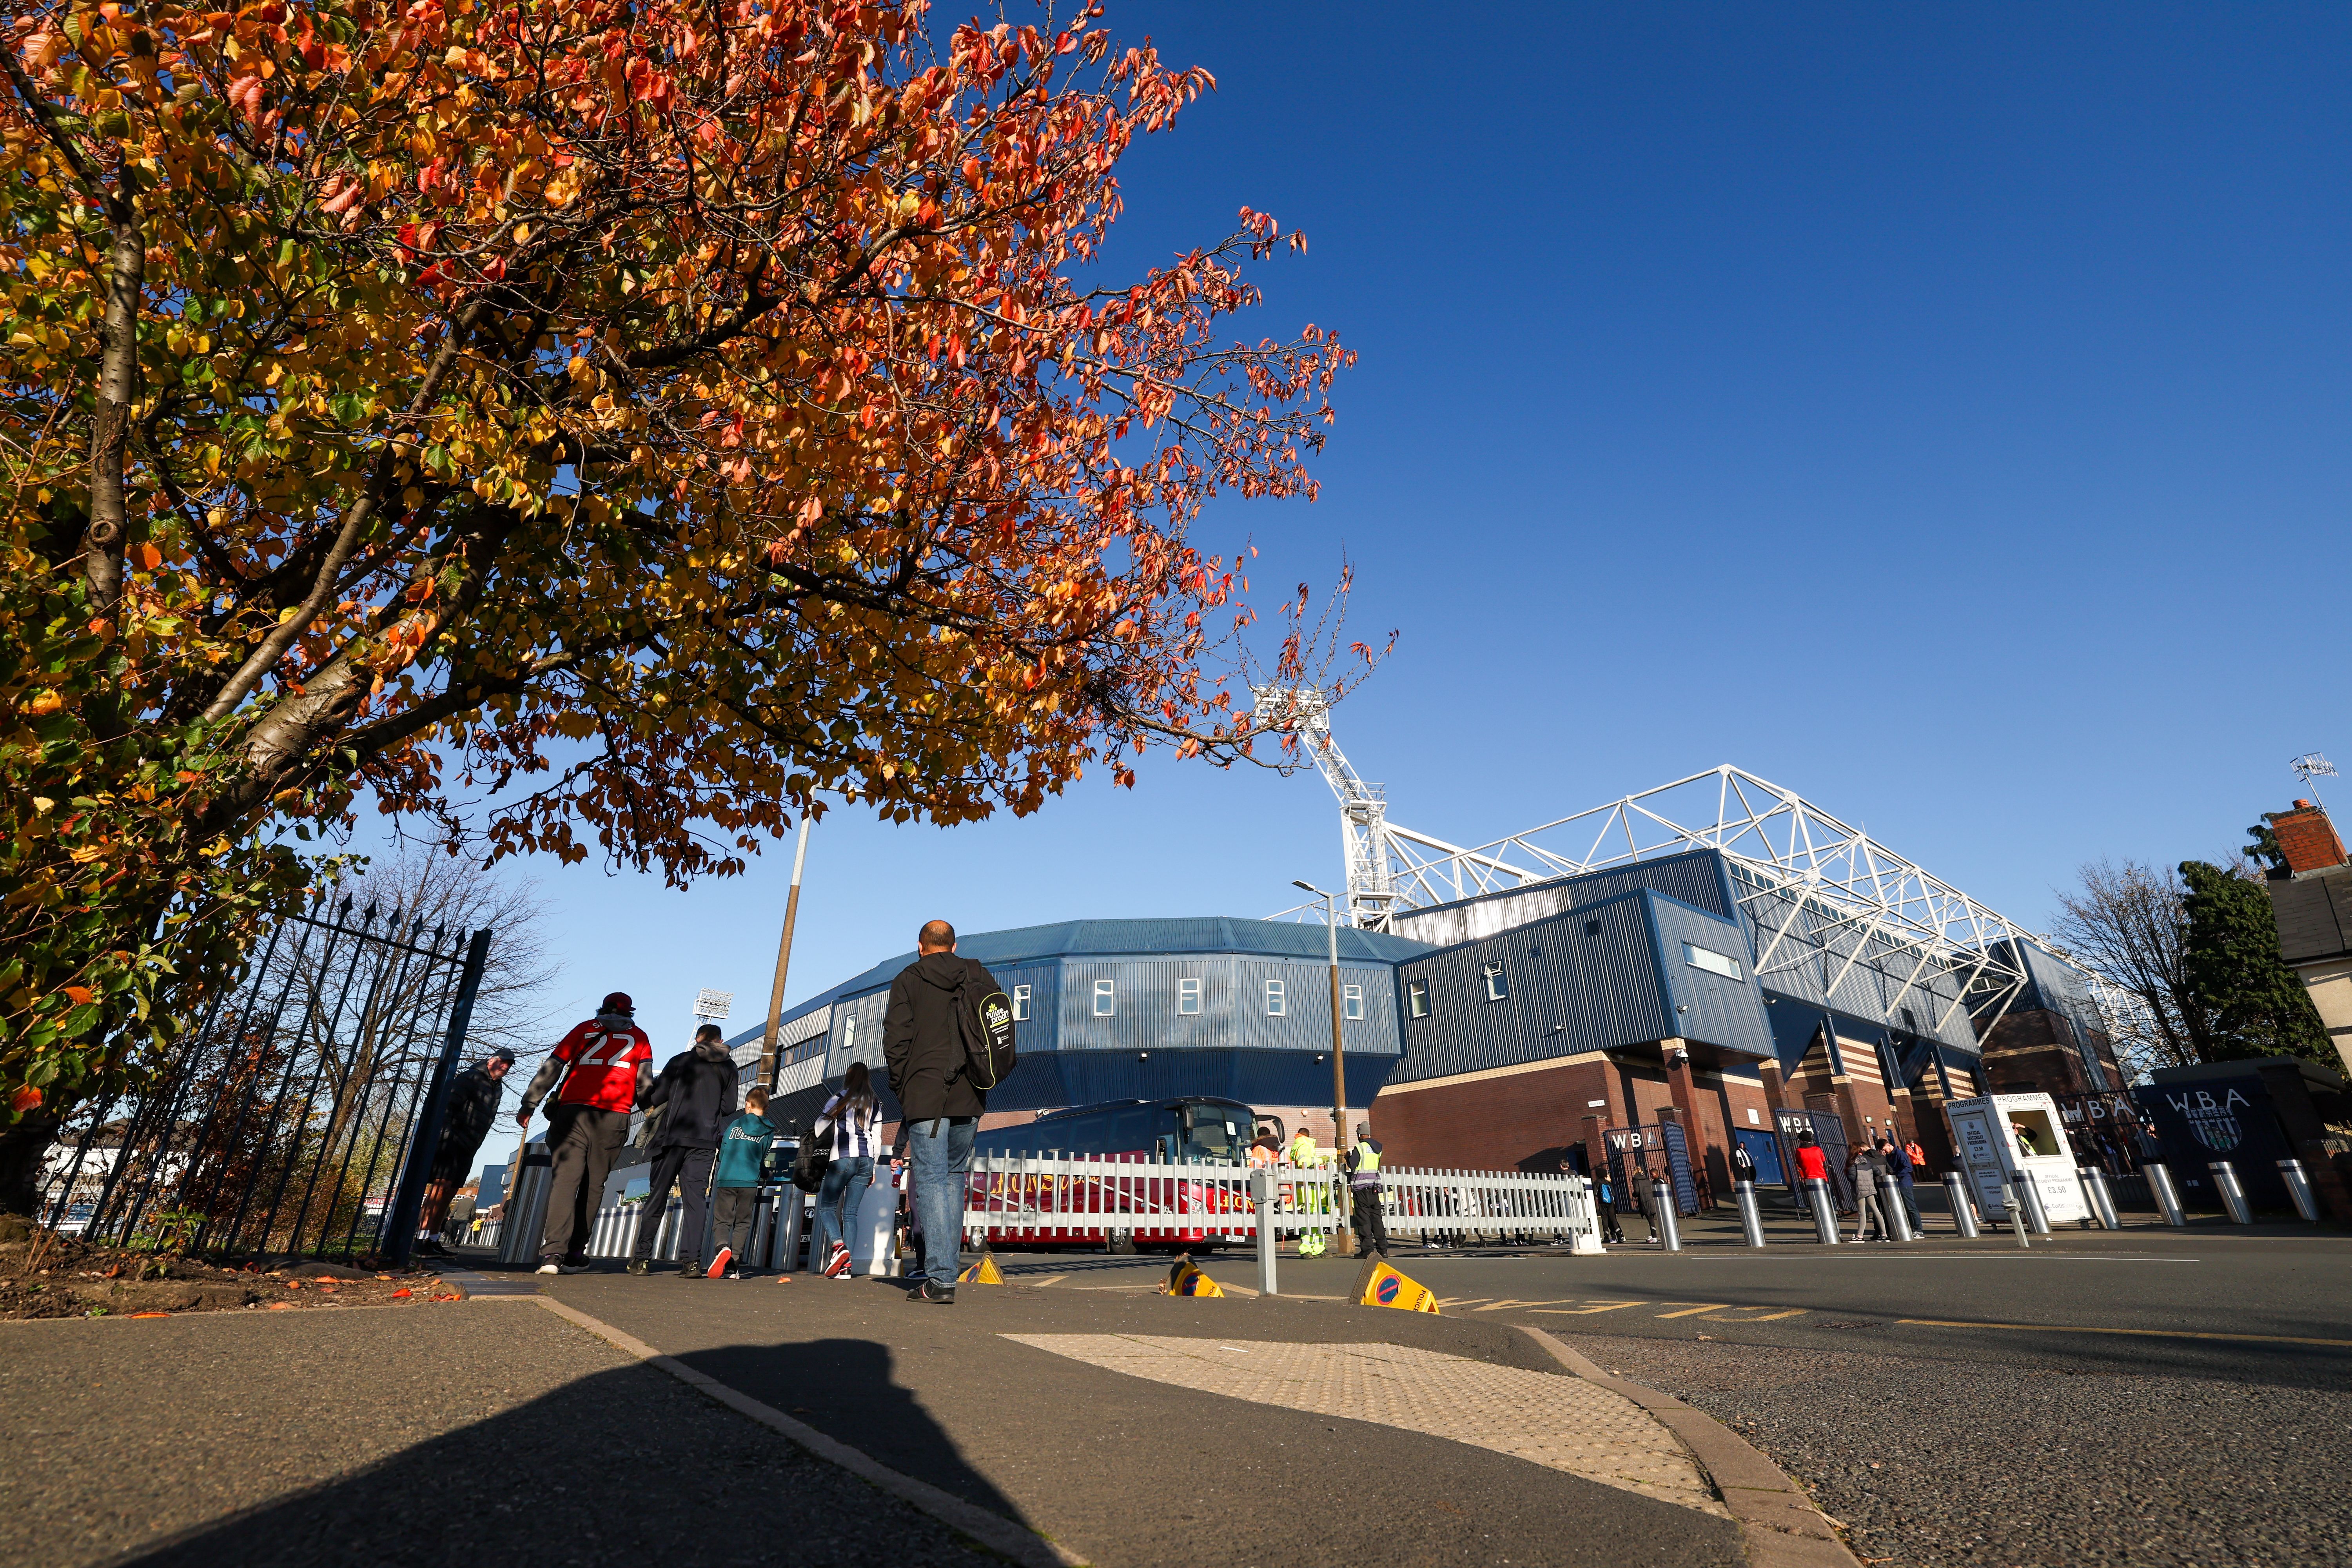 A general view of the outside of The Hawthorns with a blue sky above